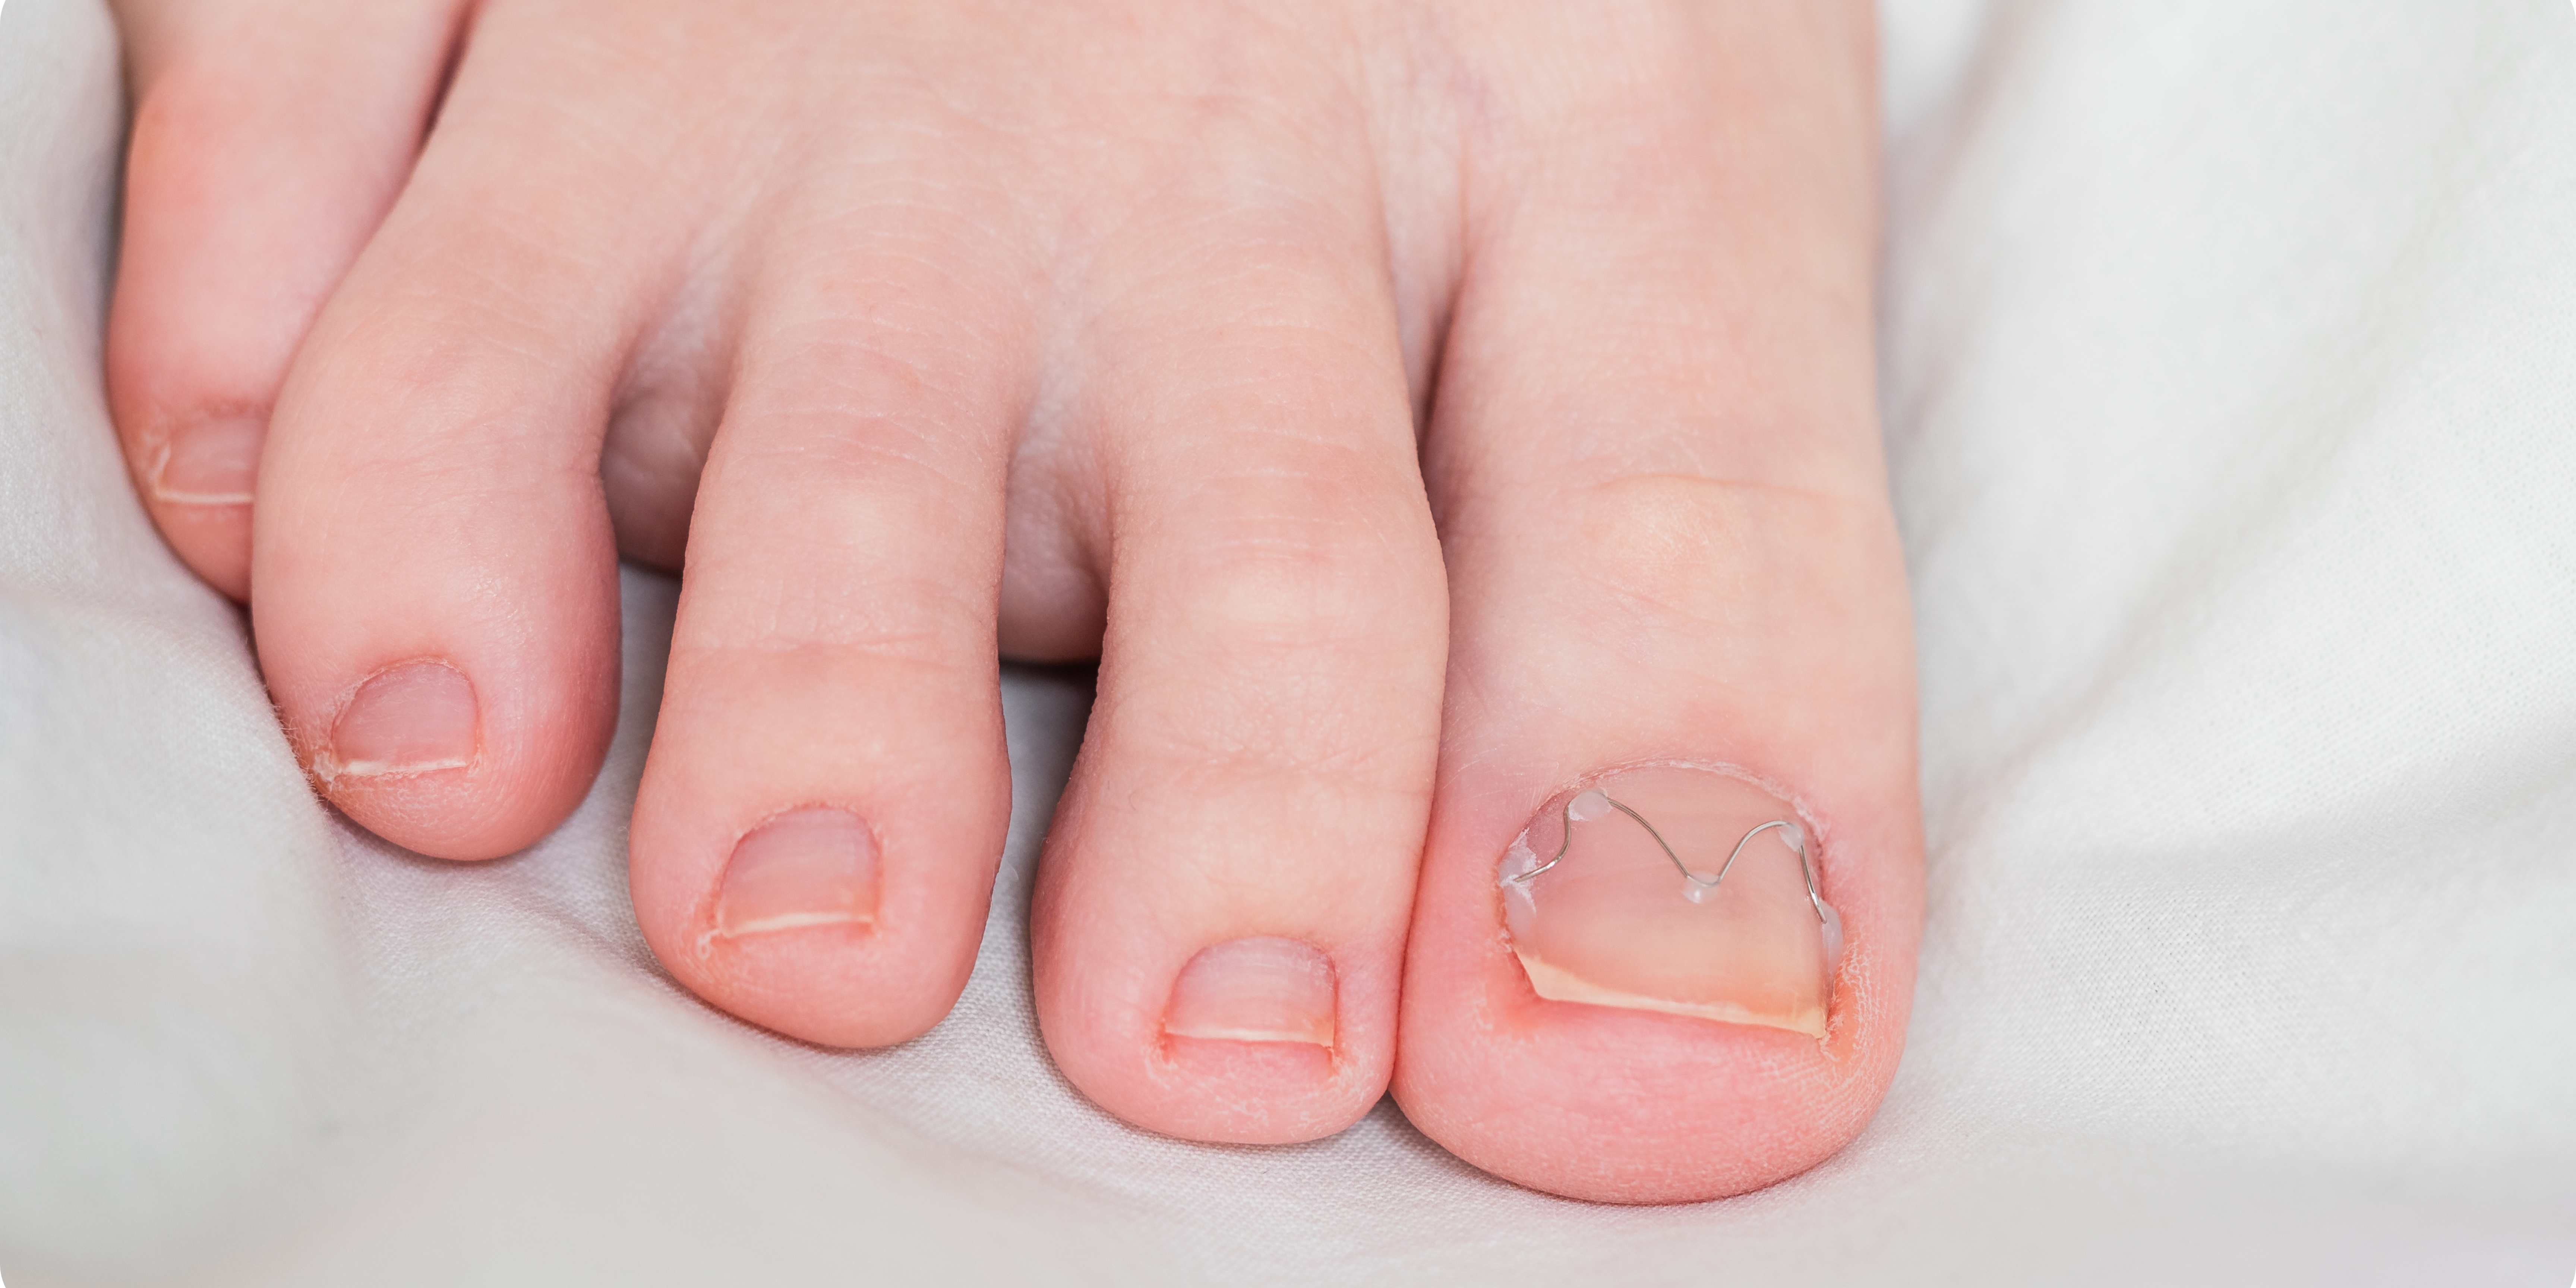 What to Do for Ingrown Toenails & How Epsom Salts Help